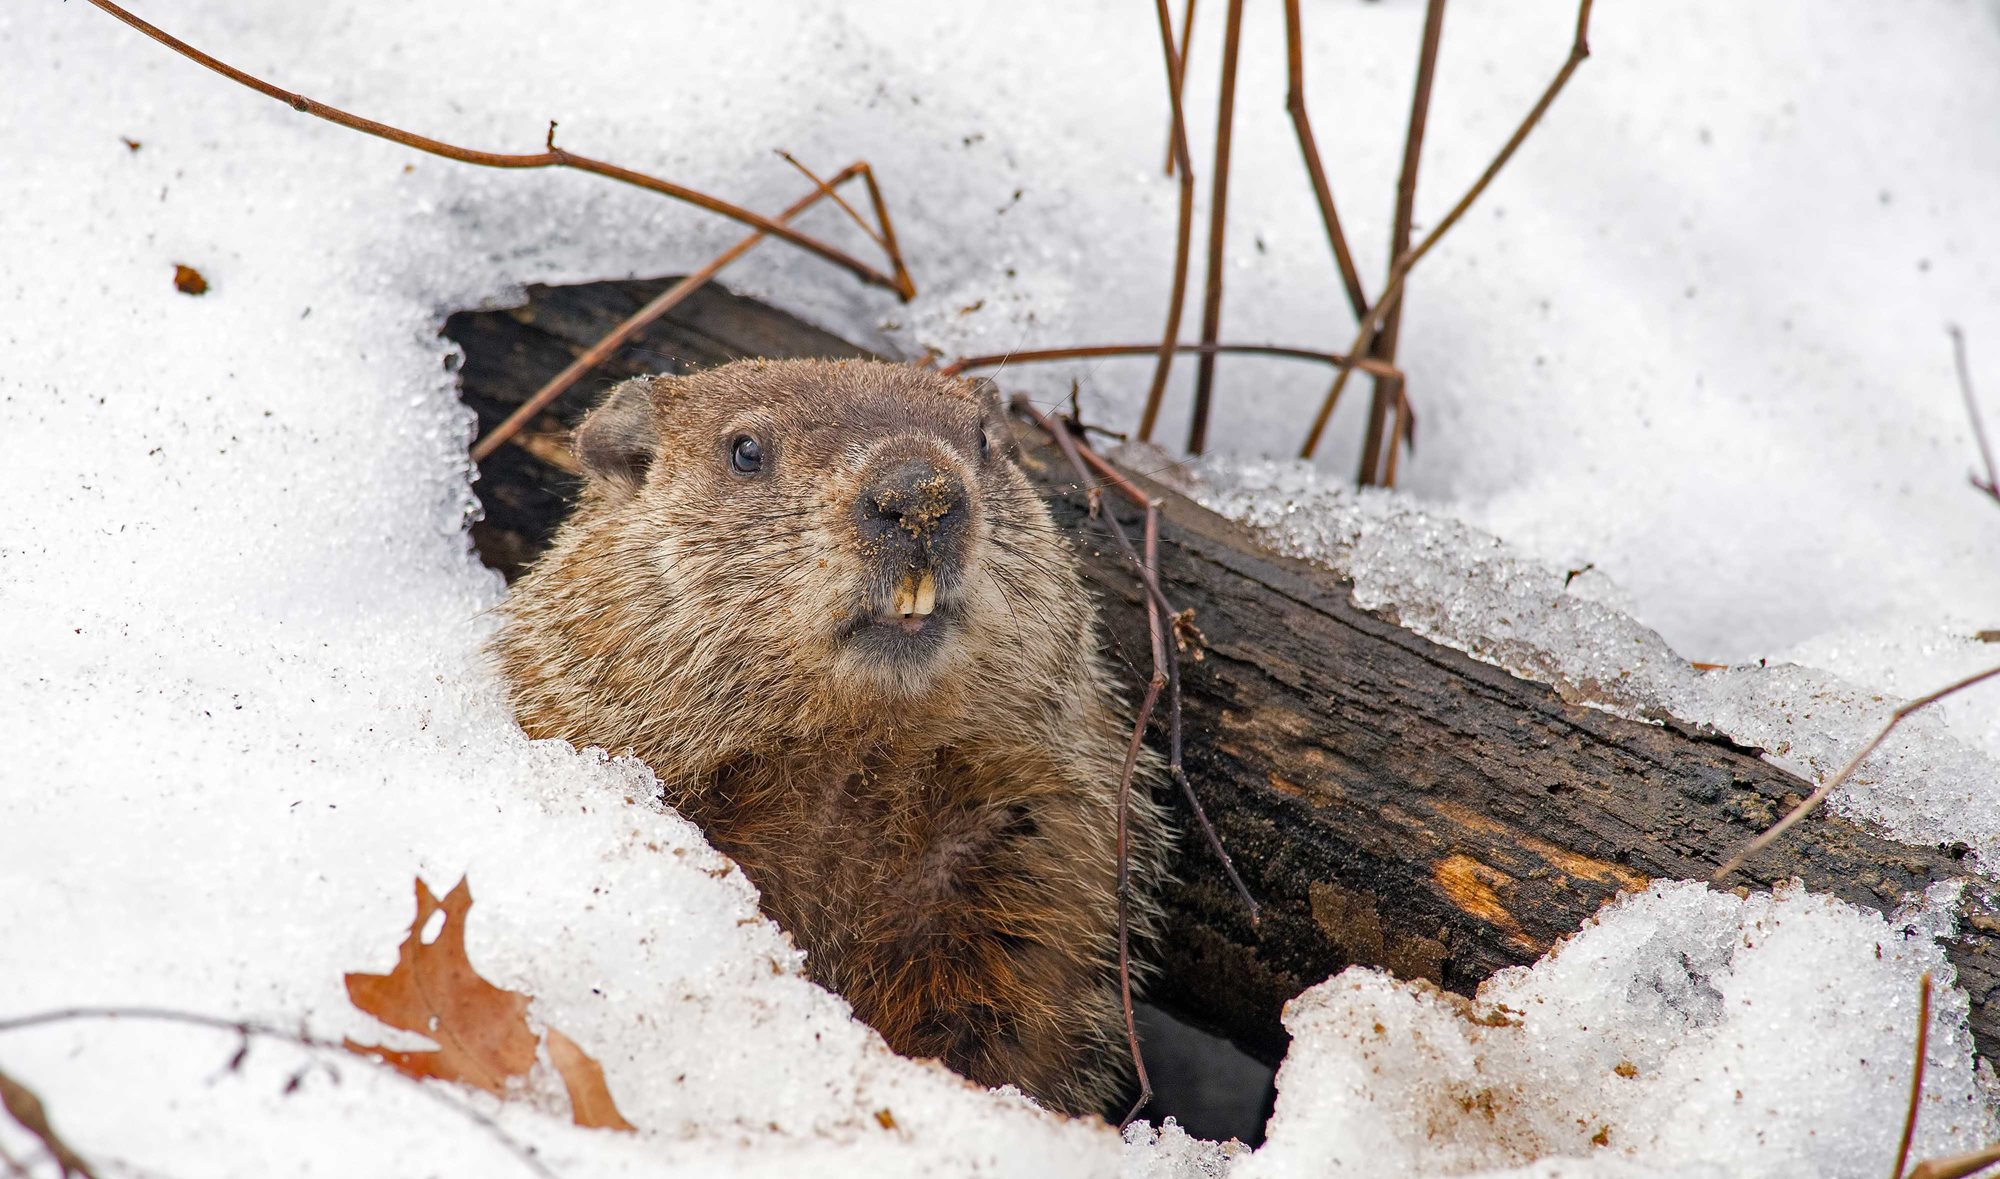 A woodchuck in its burrow.